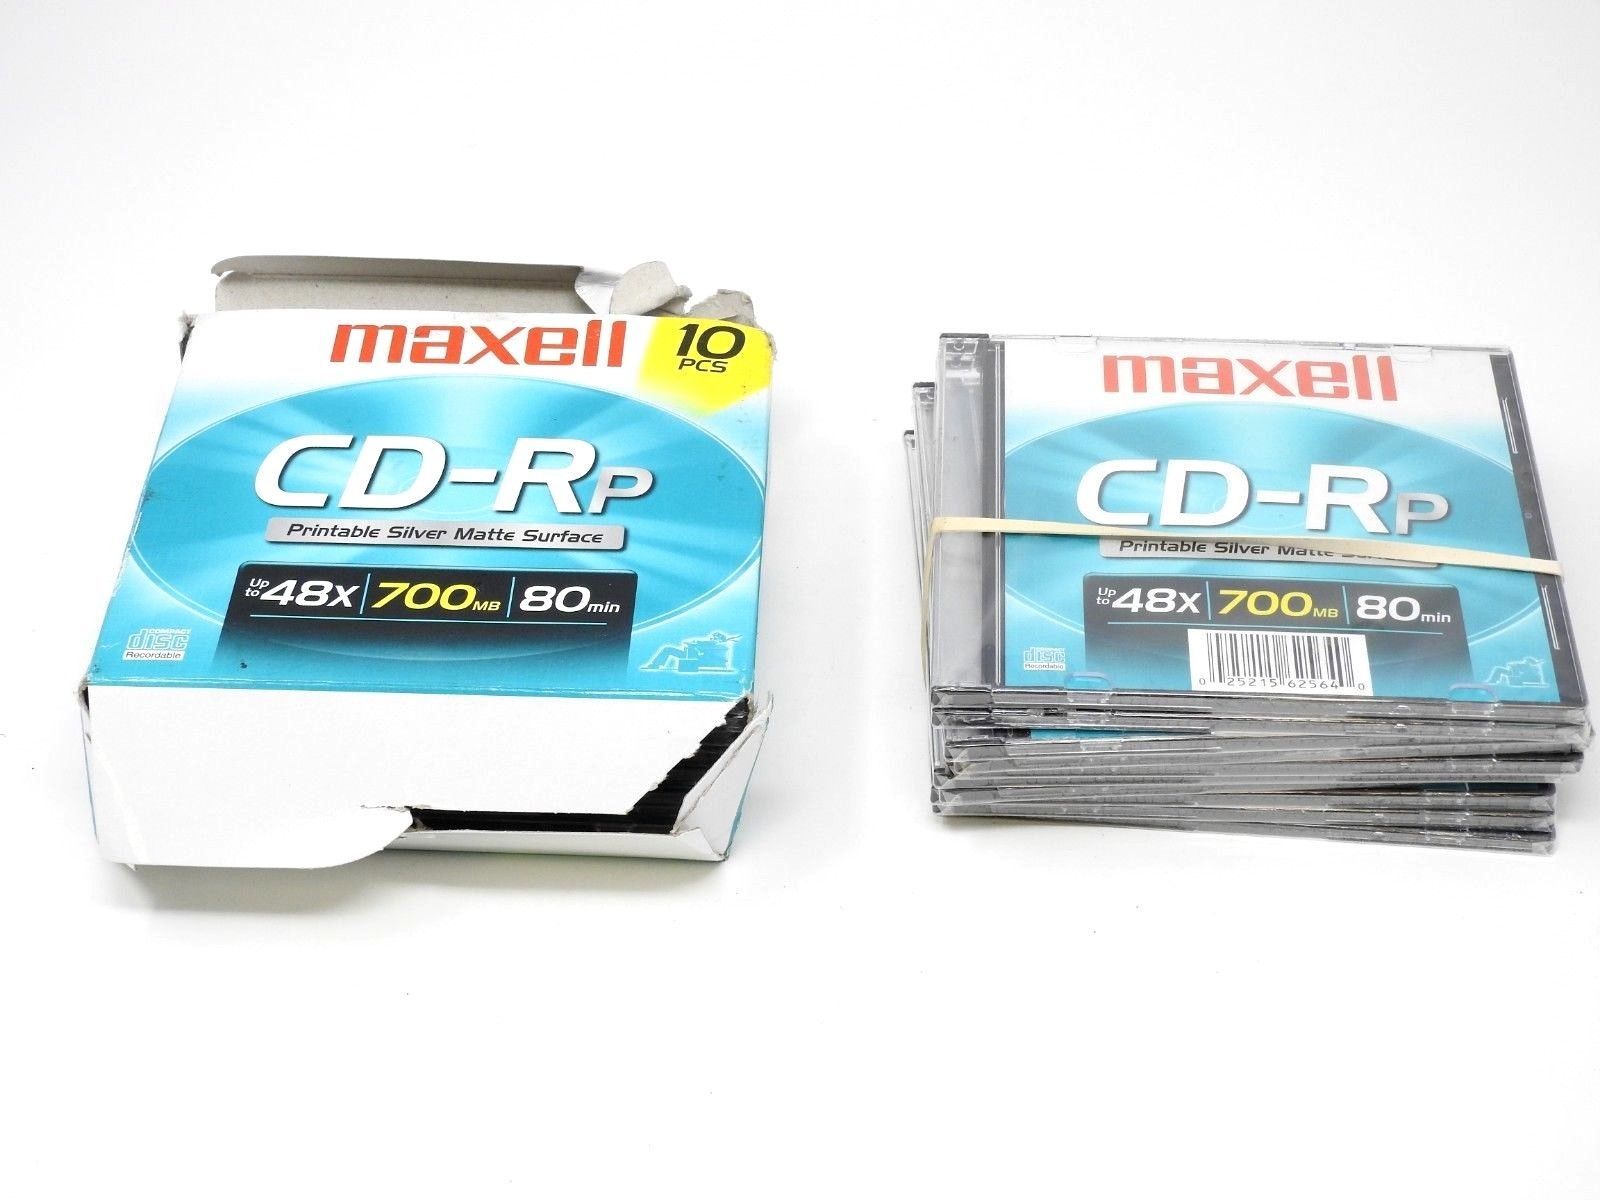 Primary image for Maxell CD-Rp Printable Silver Matte Surface (10 Pieces, 48x, 700MB, 80 Minutes)